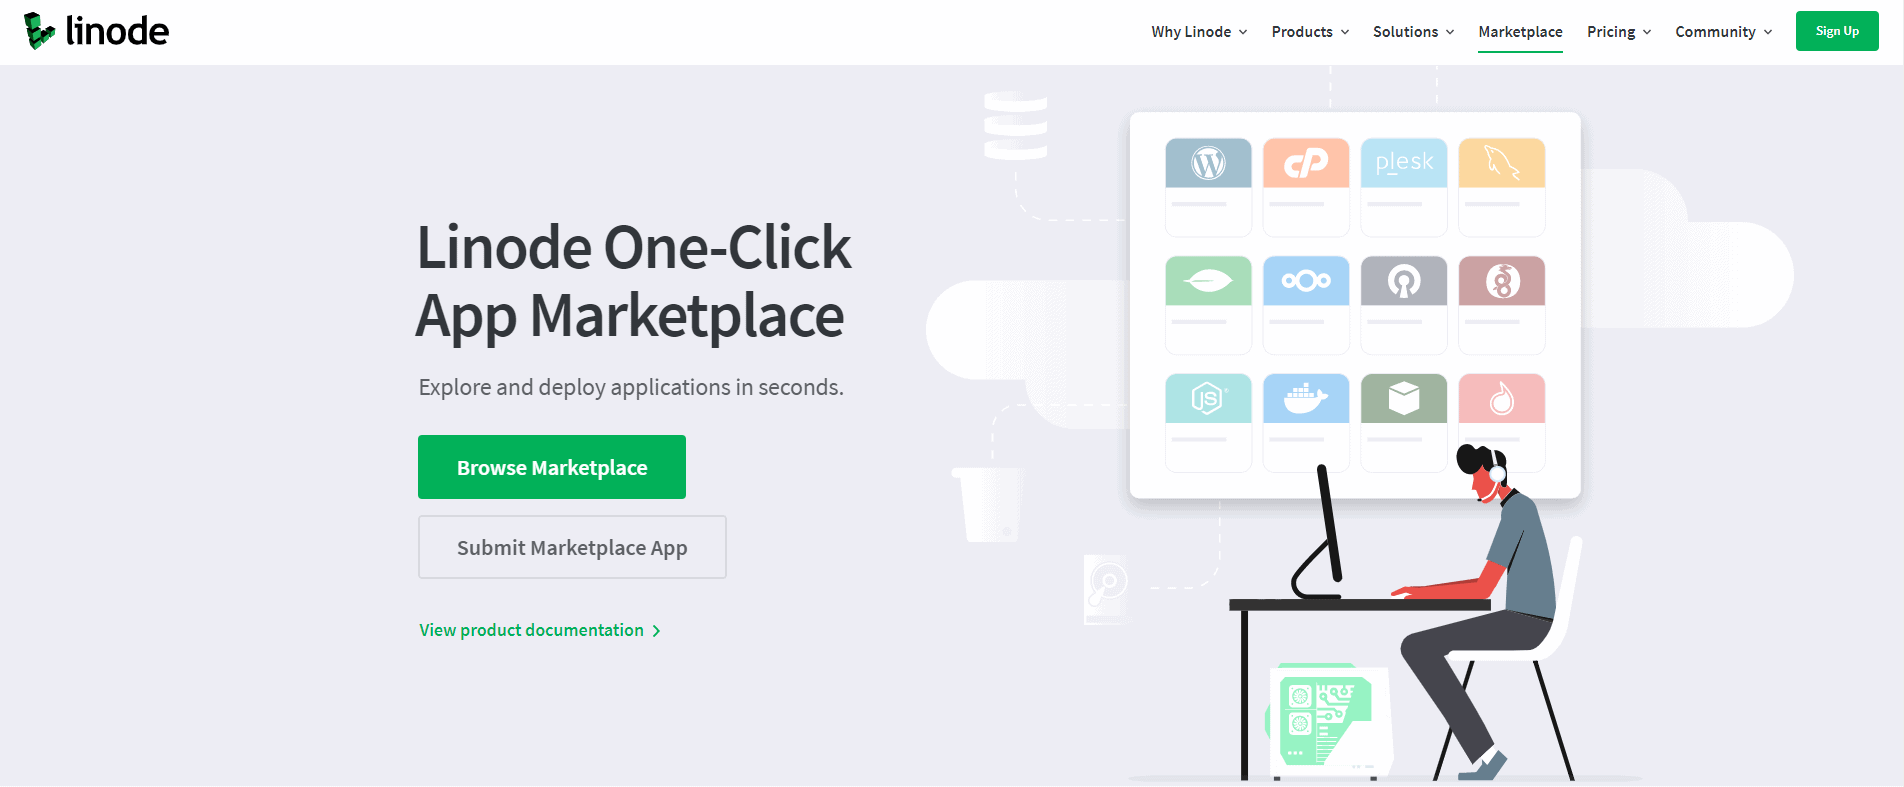 Linode One-Click Apps